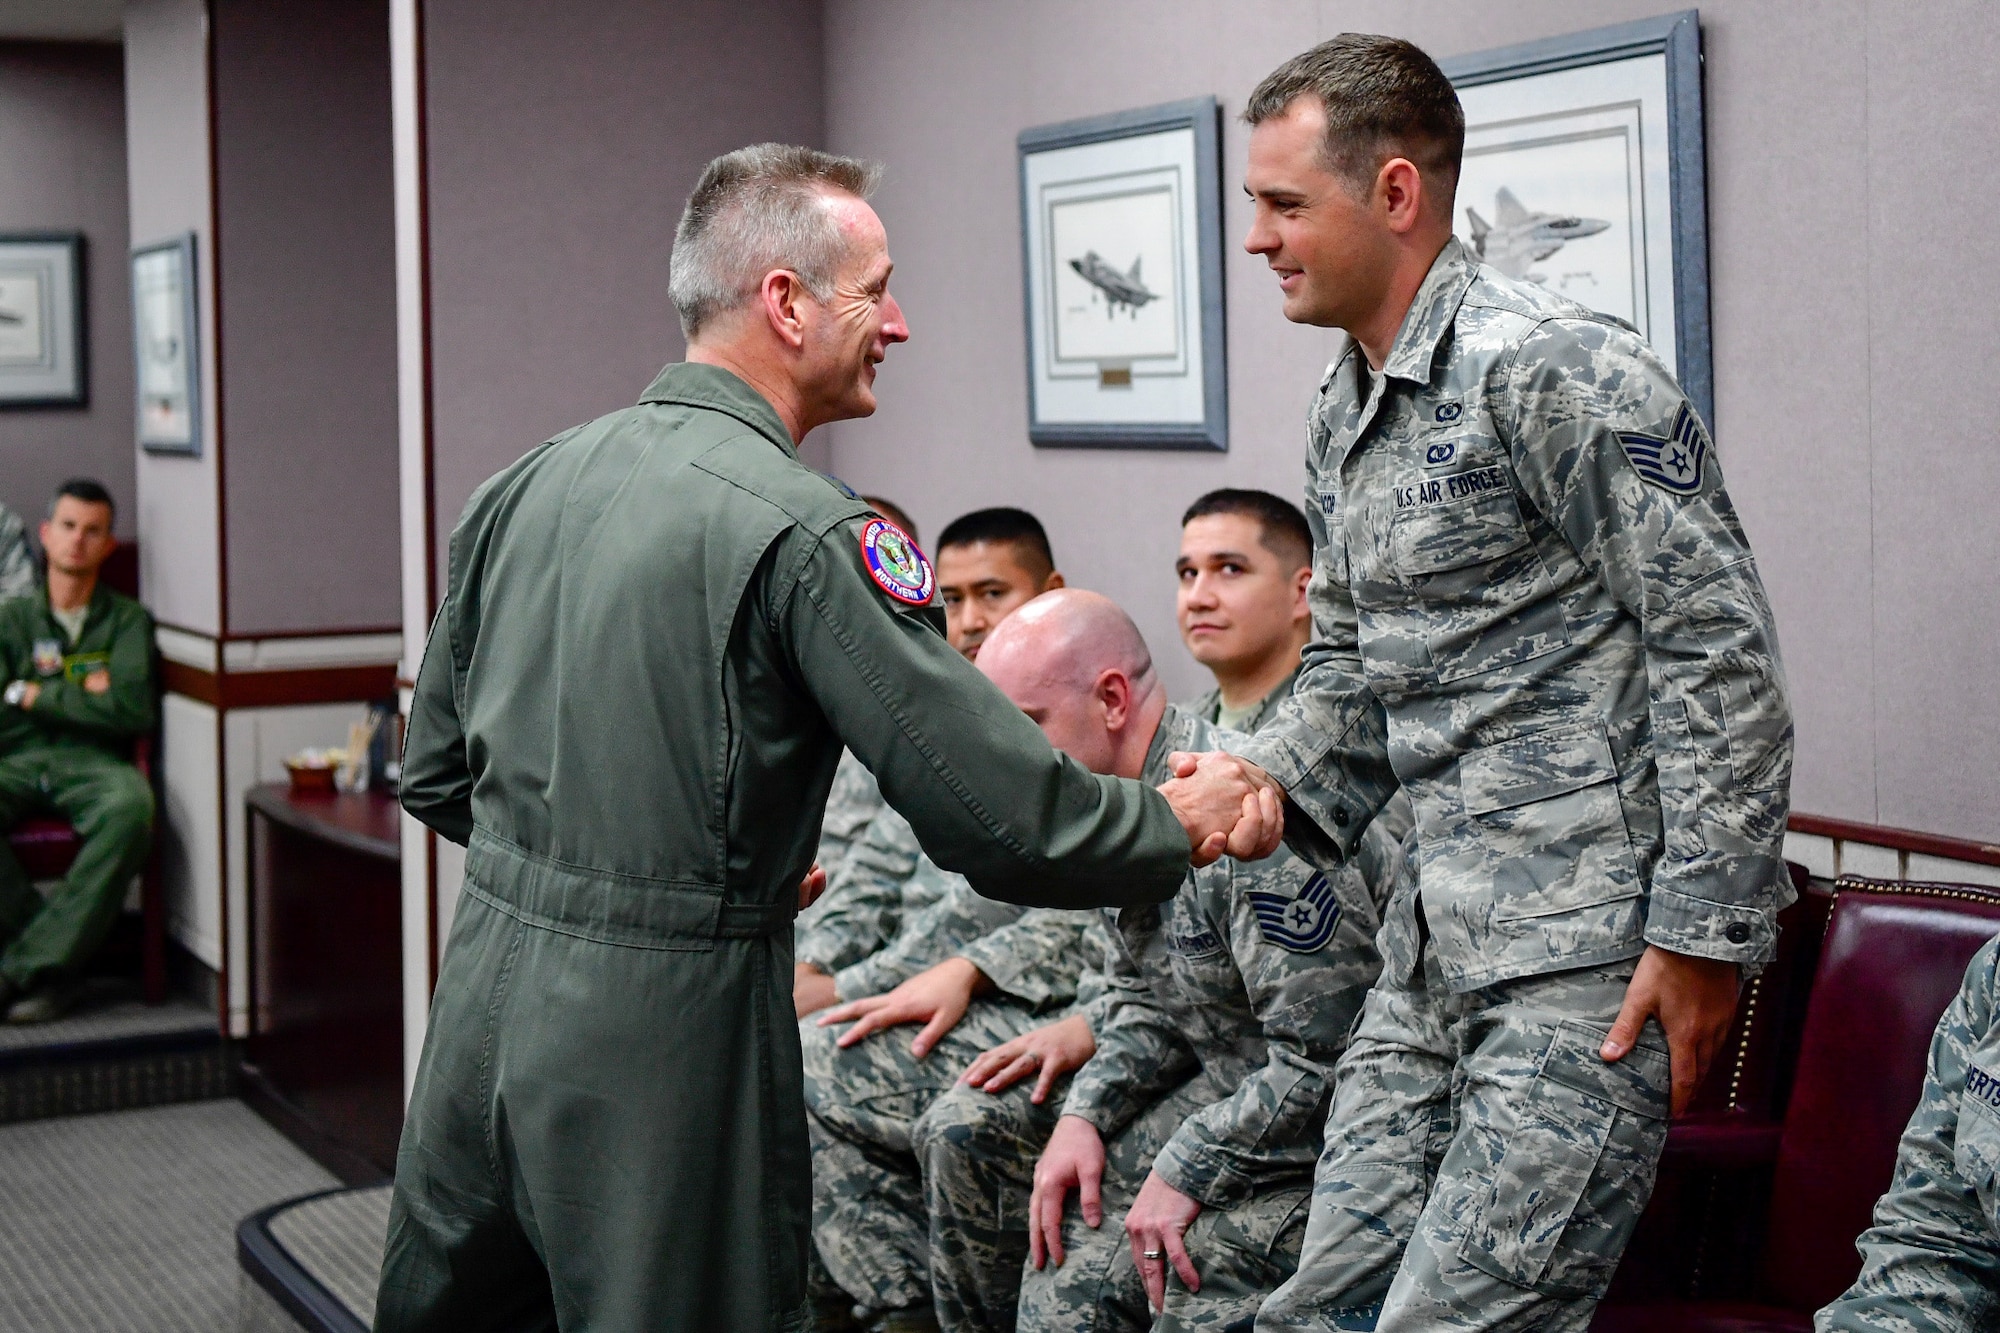 Gen. Terrence O'Shaughnessy, NORAD and USNORTHCOM commander, recognizes Staff Sgt. David Jacob, 225th Air Defense Squadron weapons director, with a commander’s coin for the critical role he played during the Aug. 10, 2018 F-15 fighter intercept of the stolen Horizon Bombardier Q400 aircraft out of SeaTac International Airport.  O'Shaughnessy visited the WADS Aug. 23 in order to commend the WADS operations crew for their expert command and control of the 142nd Fighter Wing's F-15 intercept of the stolen aircraft. (U.S. Air National Guard photo by Maj. Kimberly D. Burke)